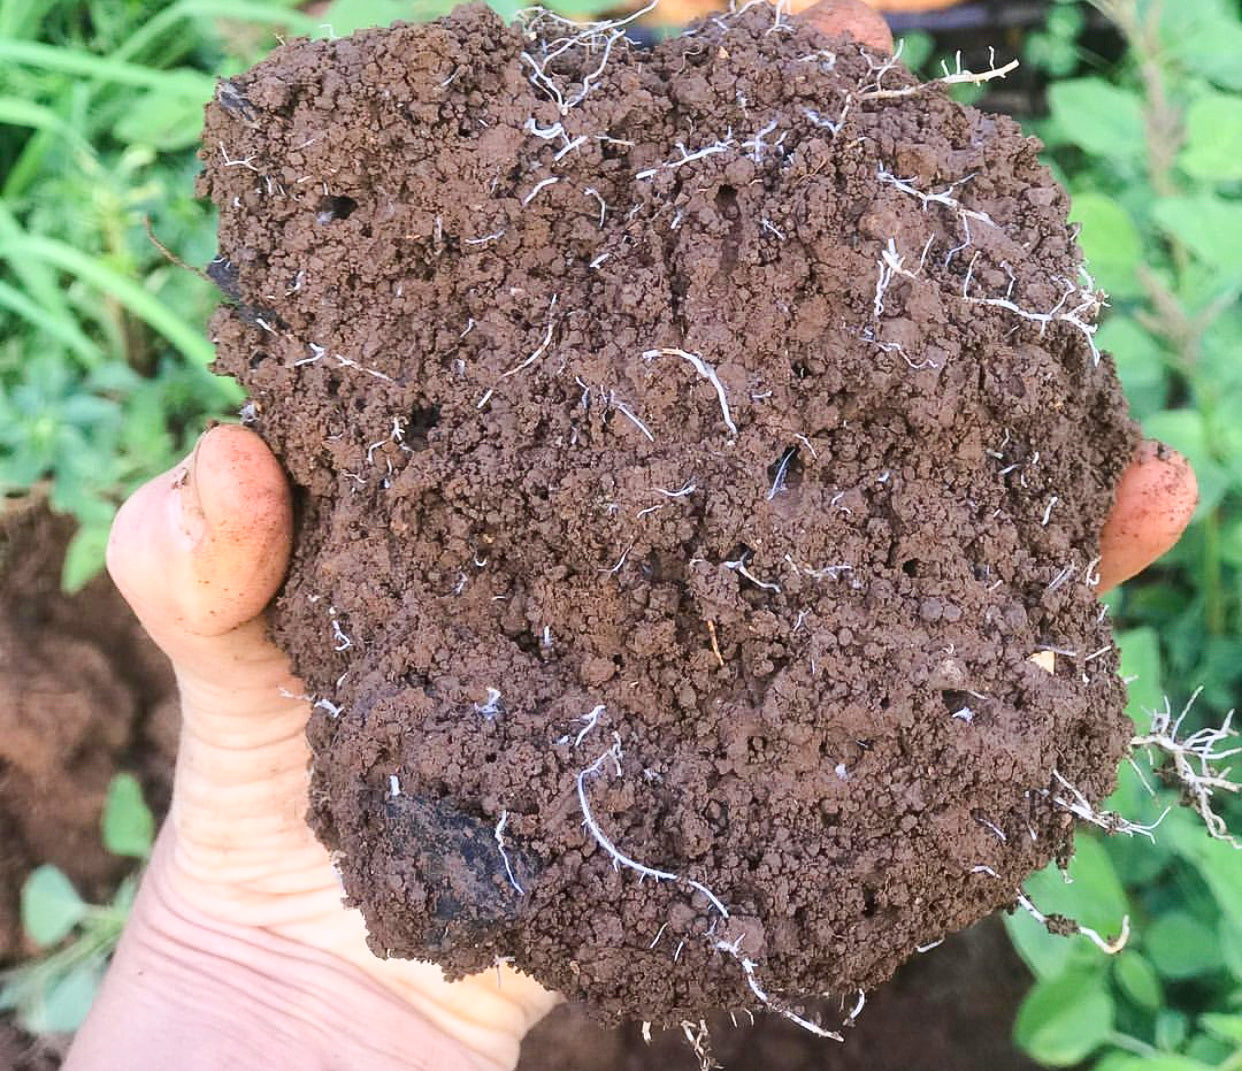 Soil Health is Our Health - Top Tips To Improve Soil Quality Post-Floods